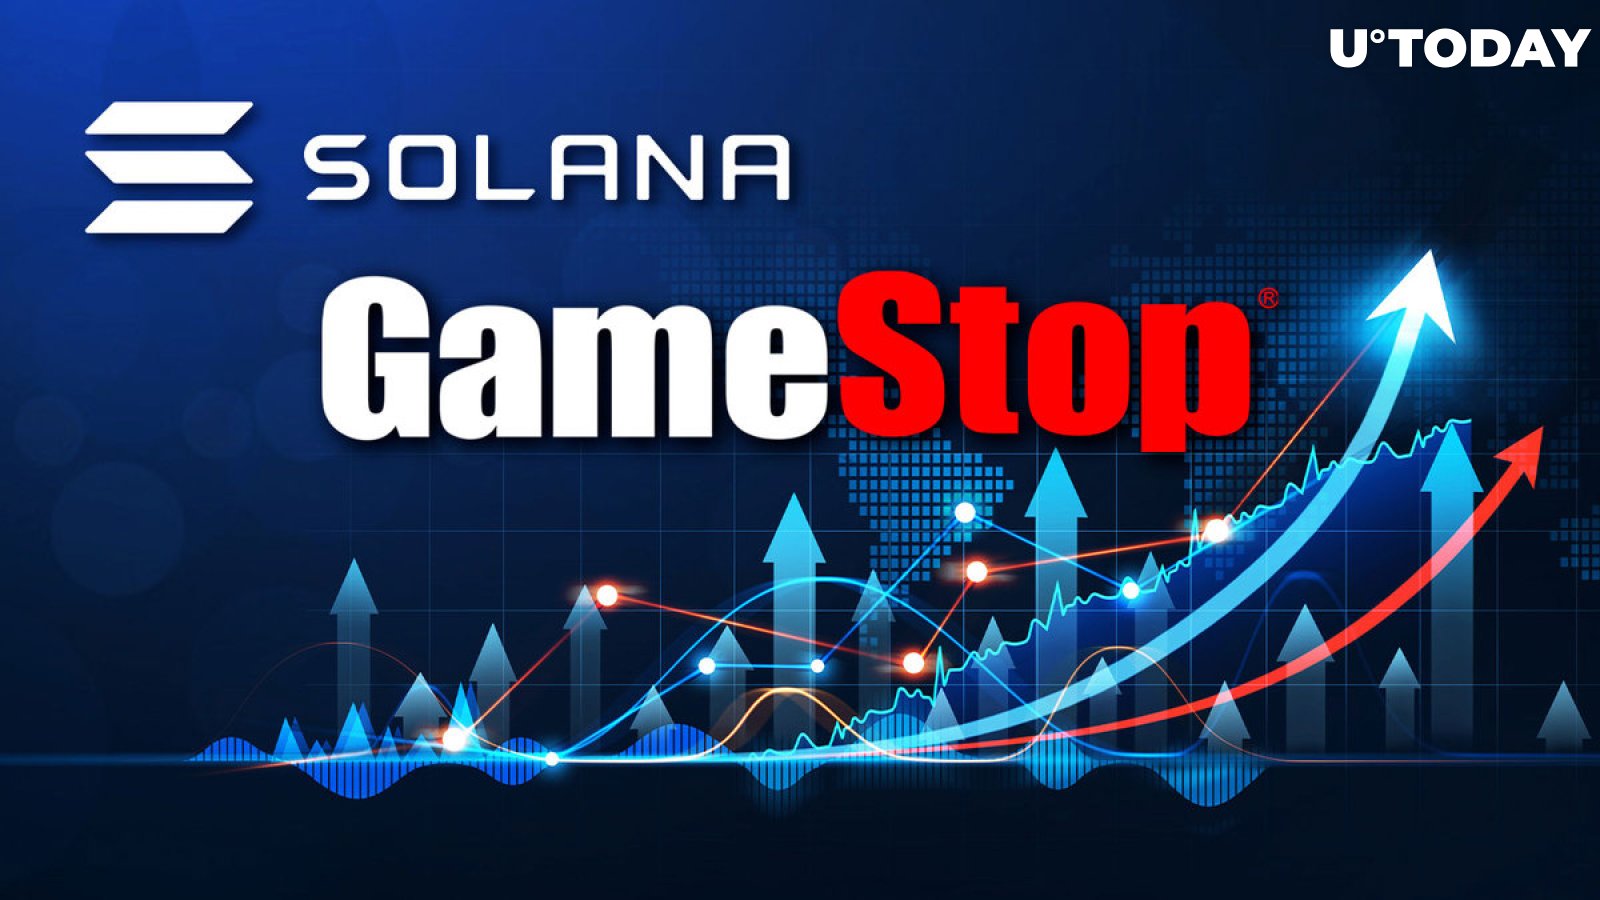 Solana's GameStop (GME) Meme Coin Skyrockets 300%, Here's Why